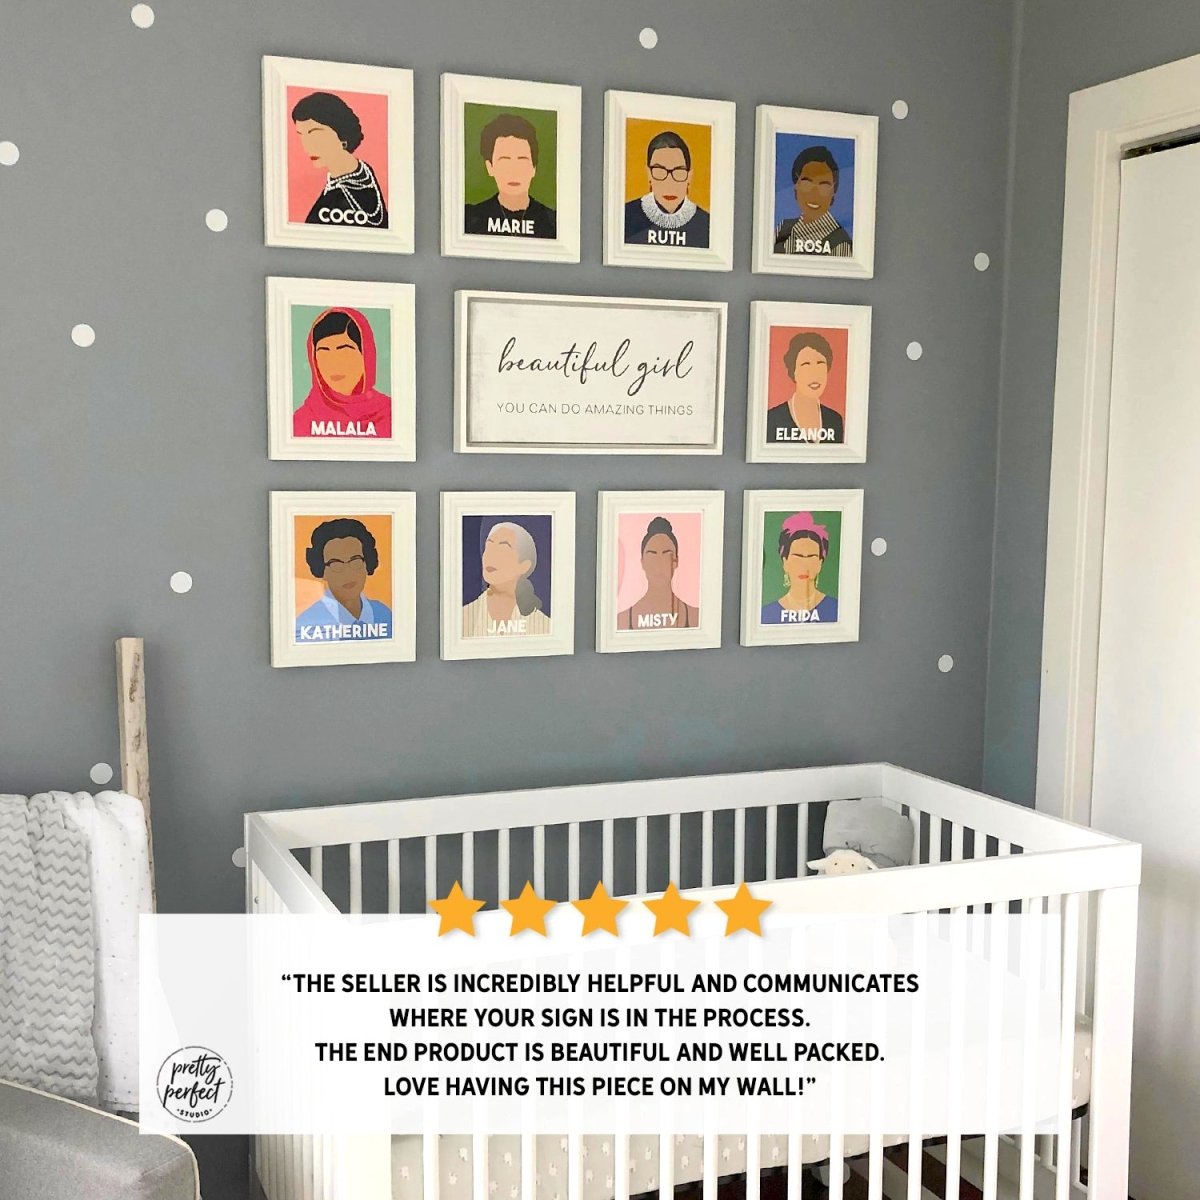 Customer product review for beautiful girl you can do amazing things wall art by Pretty Perfect Studio